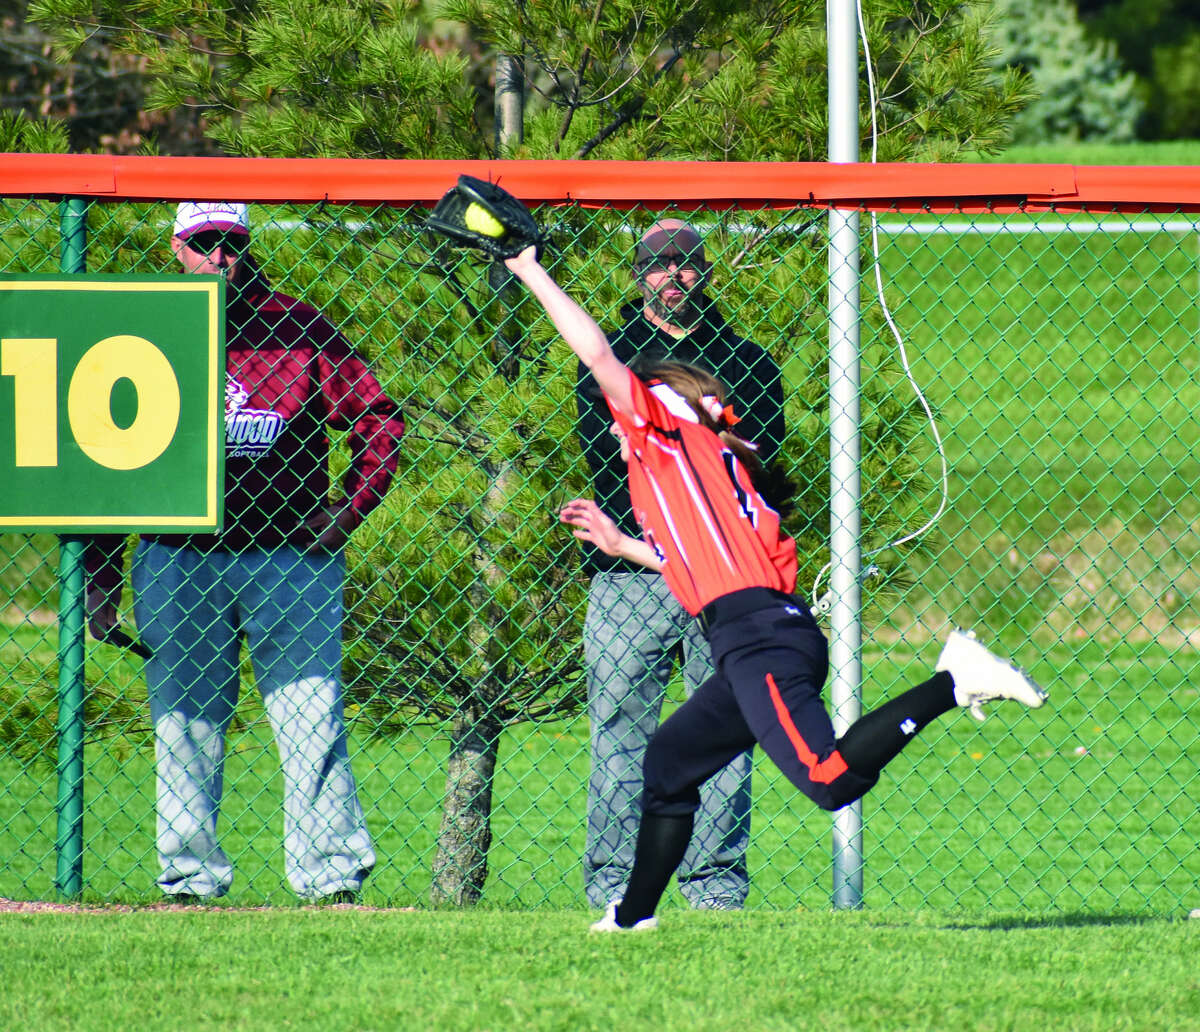 Edwardsville center fielder Lauren Taplin makes a catch just before the warning track in the outfield during the sixth inning of Tuesday’s game.